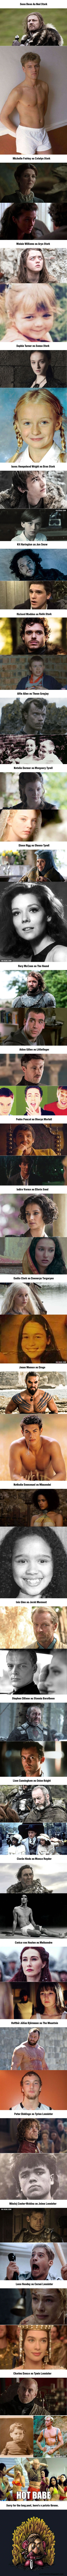 27 "Game Of Thrones" Cast: Now And Then